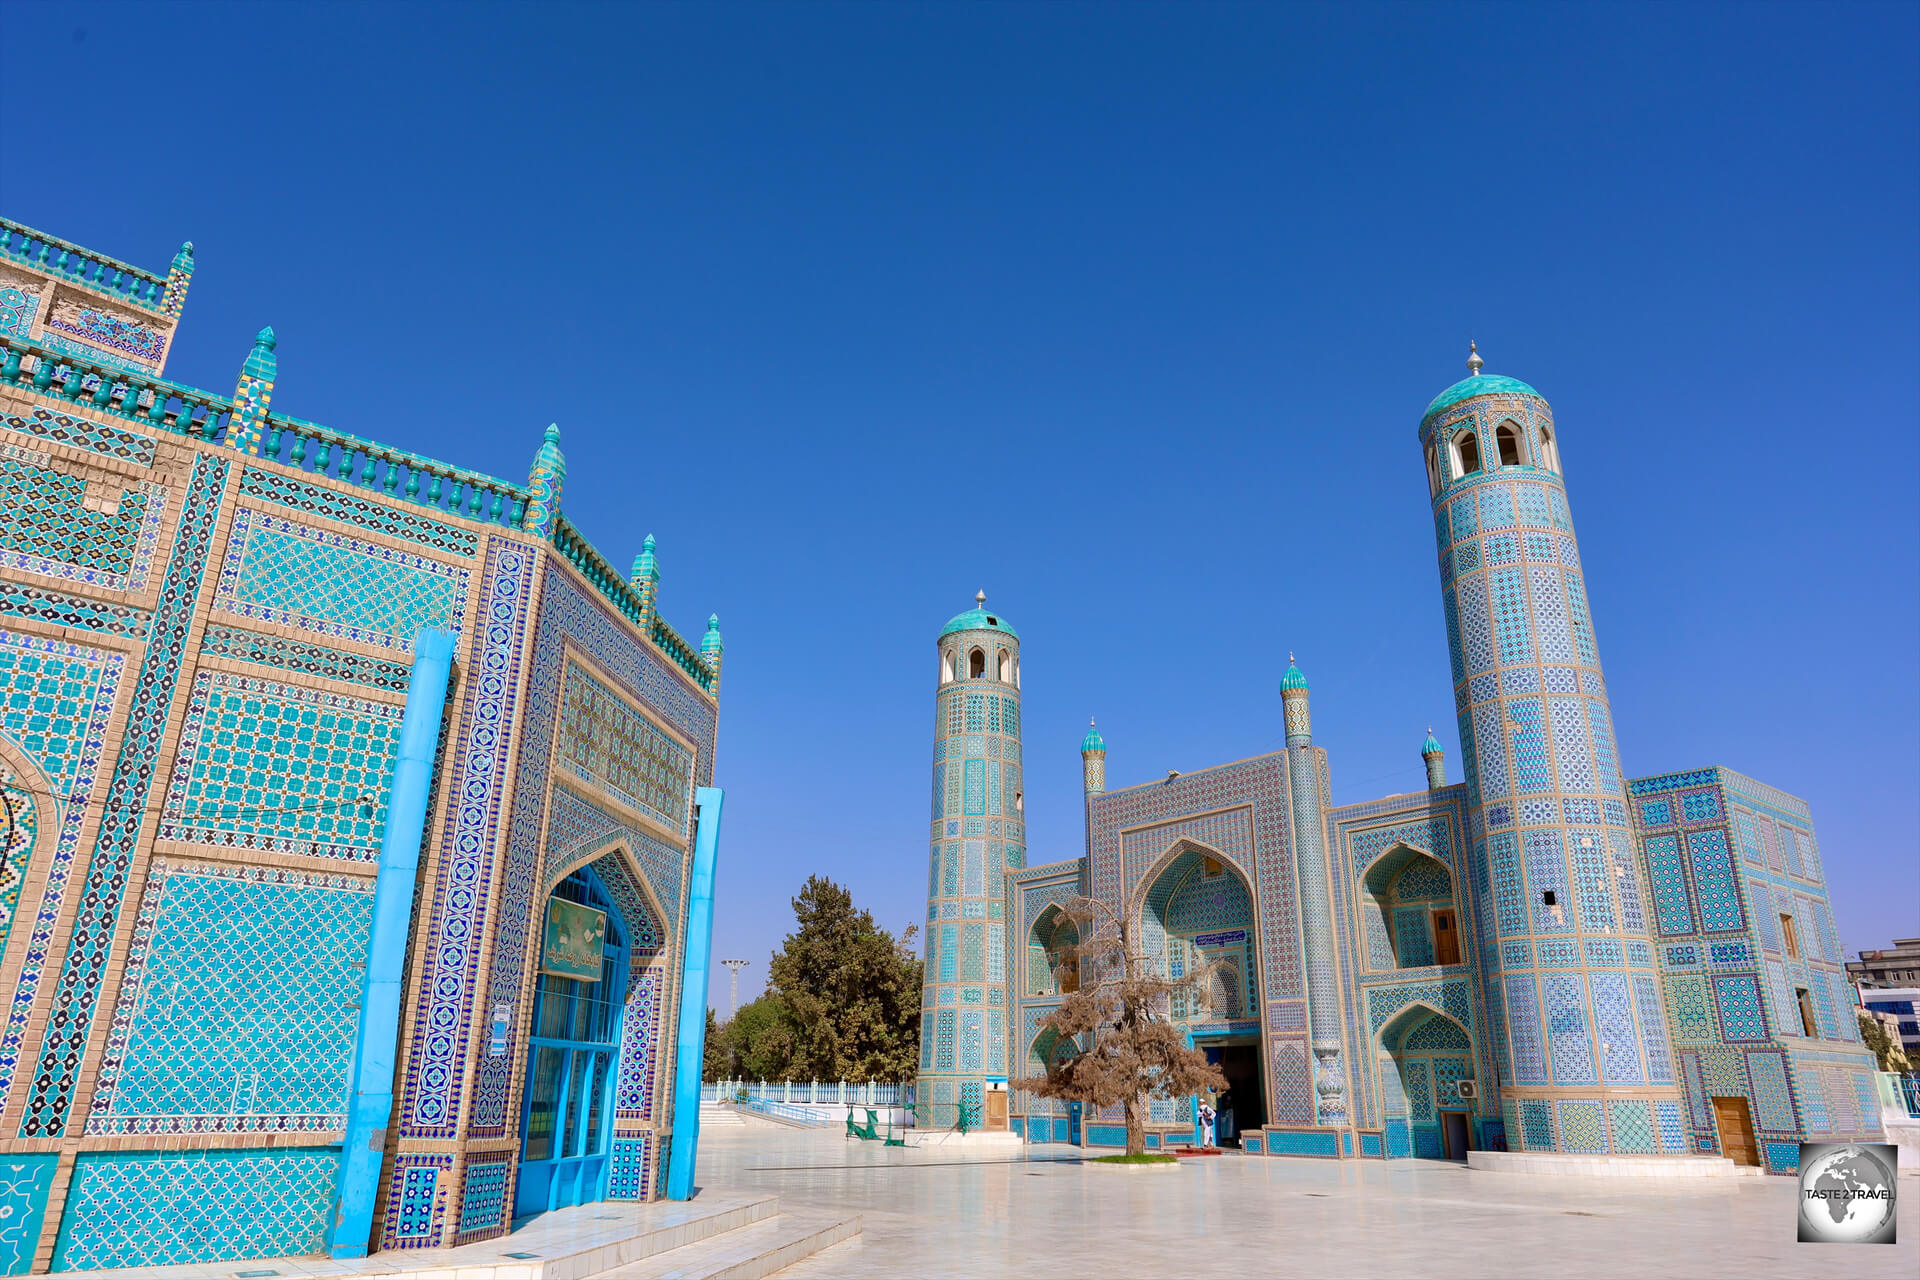 A view of the eastern gate of the Blue Mosque in Mazar-i-Sharif.